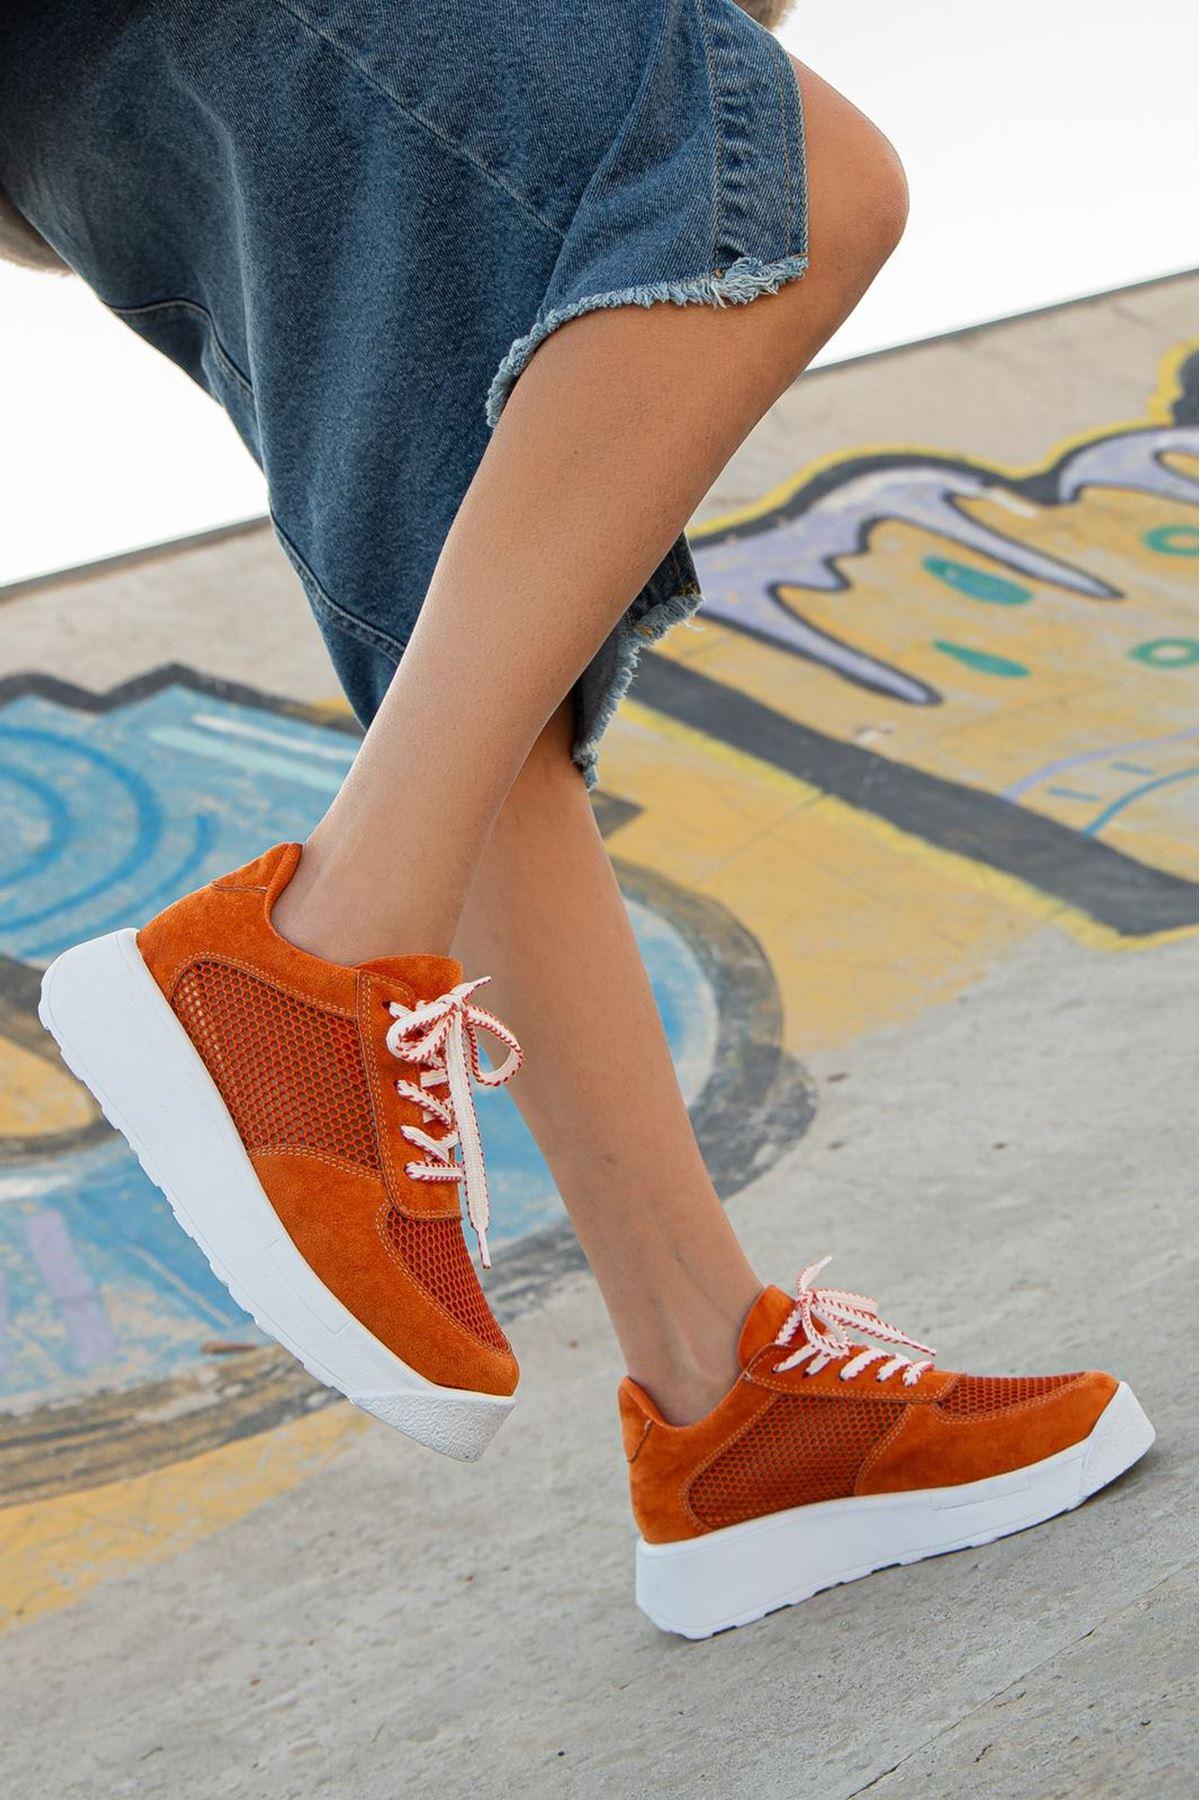 Women's Liam Orange Suede - Mesh Lace-Up Detail Thick Sole Sneakers shoes - STREET MODE ™